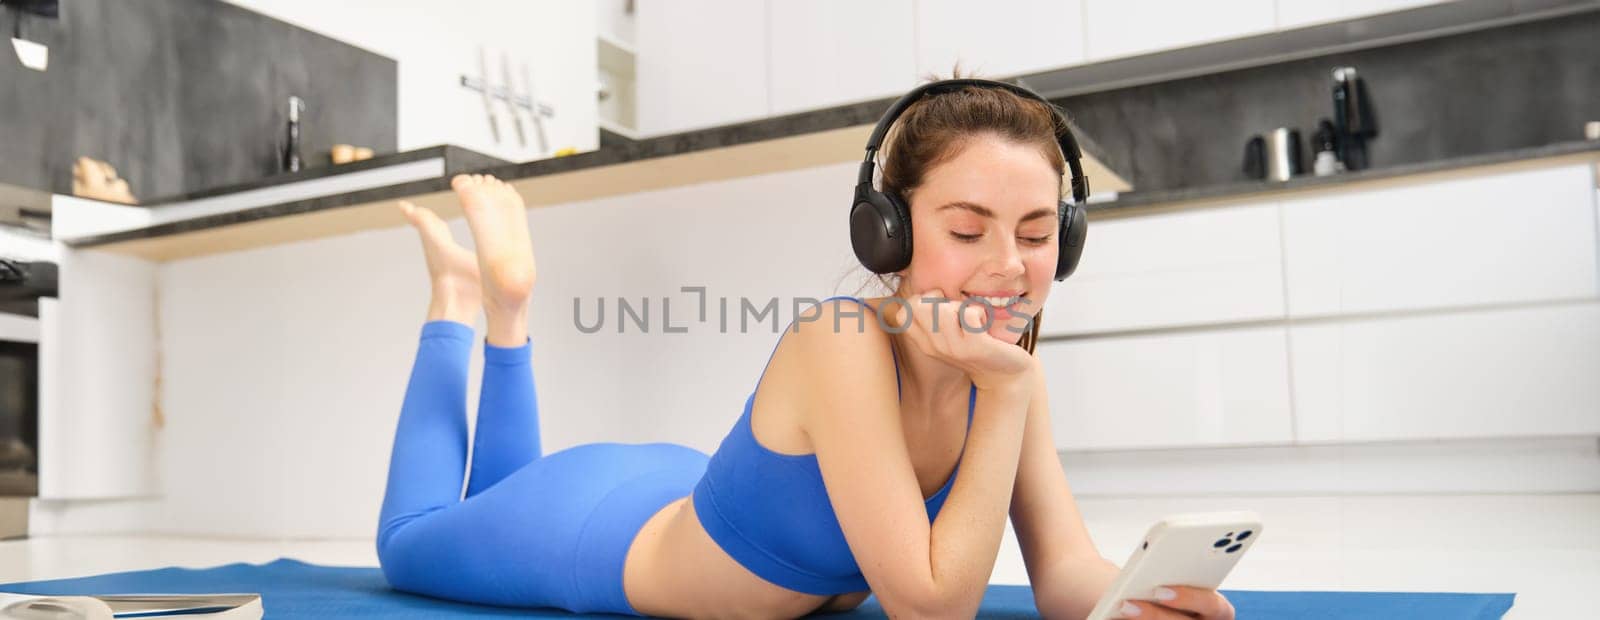 Portrait of fitness woman, listening yoga music in headphones, using her smartphone during workout at home, laying on blue sports mat.